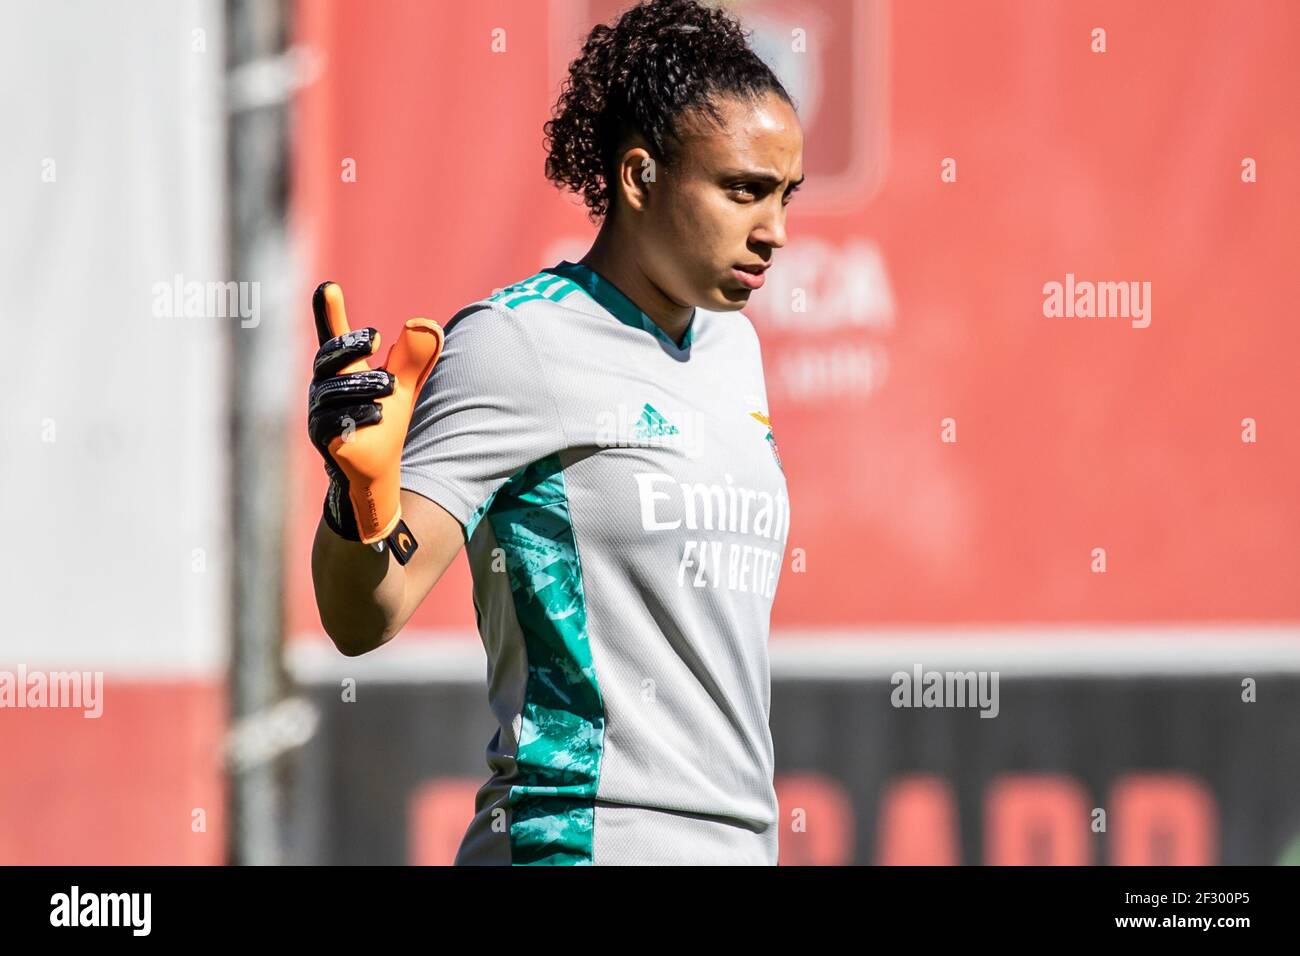 Lisbon, Portugal. 13th Mar, 2021. Benfica´s Goalkeeper Leticia Silva during  the women´s Liga PBI game between Benfica and Sporting at Benfica Campus in  Lisbon, Portugal Credit: SPP Sport Press Photo. /Alamy Live